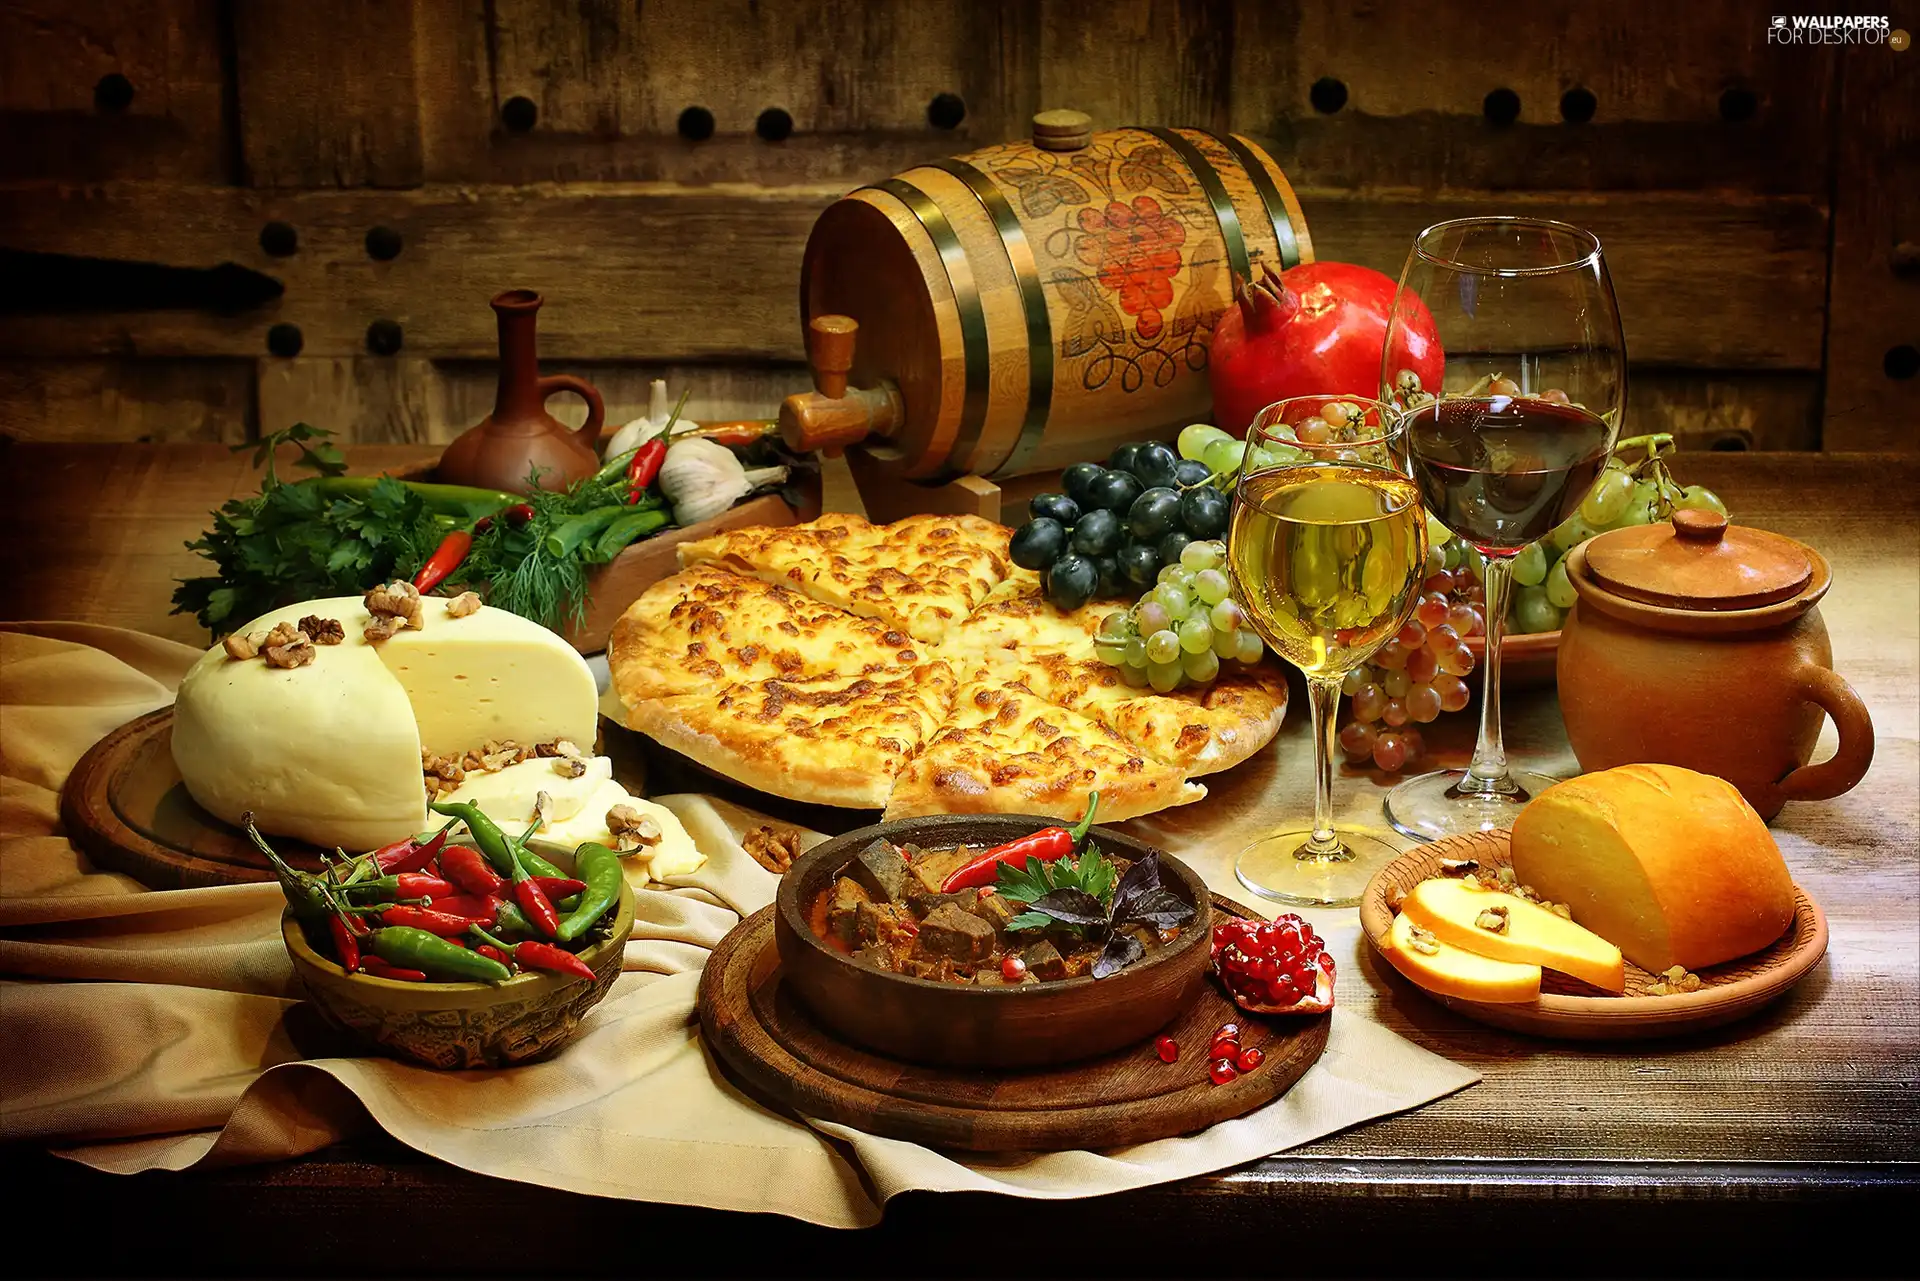 Wine, Laid, pizza, barrel, Cheese, feast, Table, Grapes, glasses, Chilies